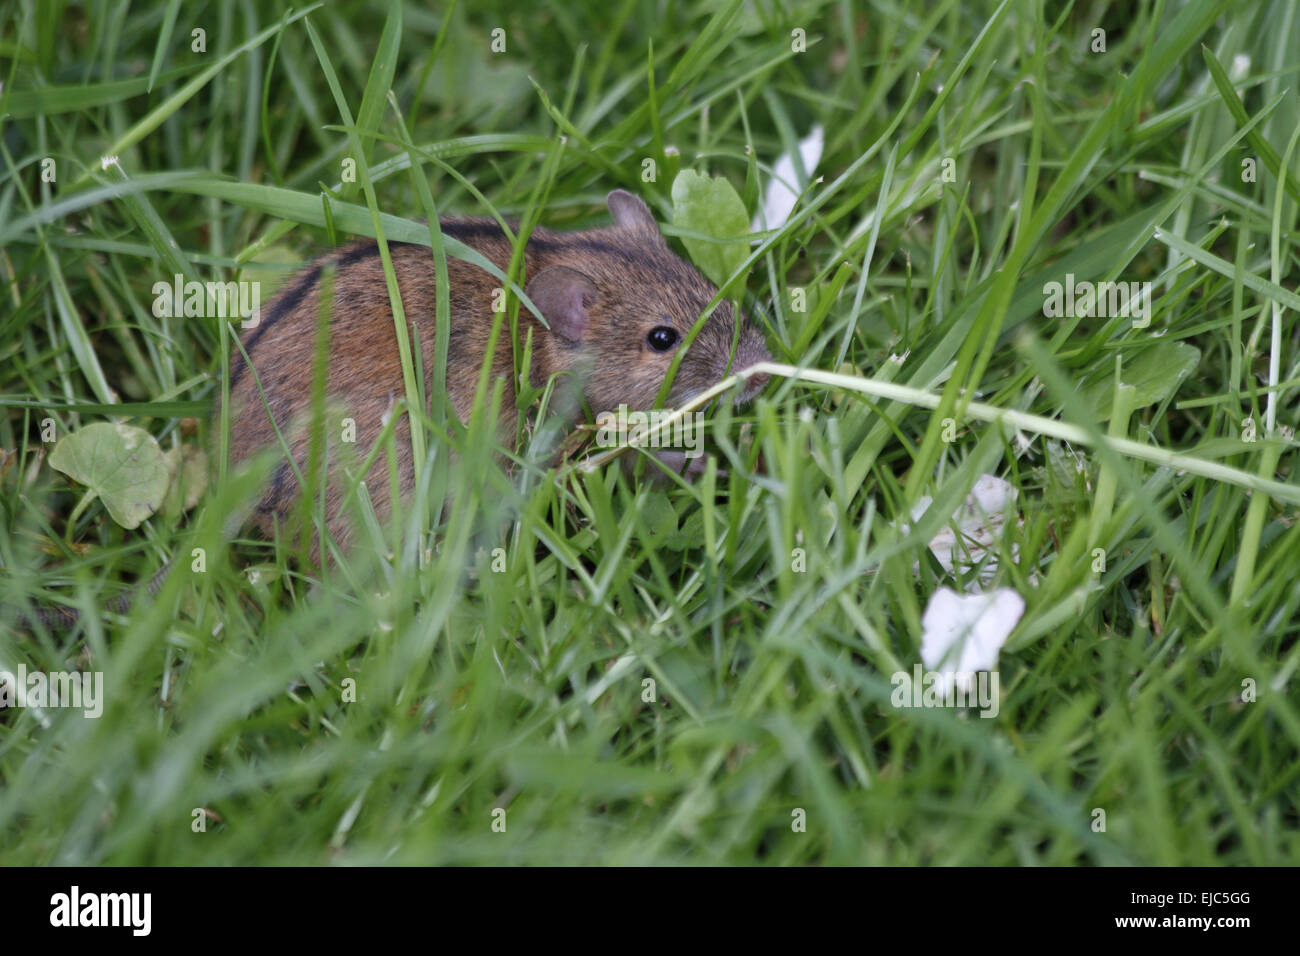 Strisce campo mouse Foto Stock